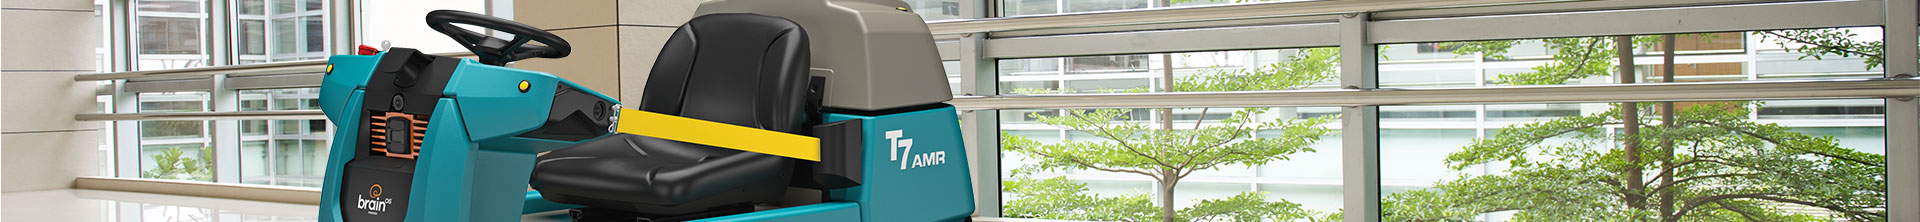 T7AMR Robotic Floor Scrubber cleaning a hospital